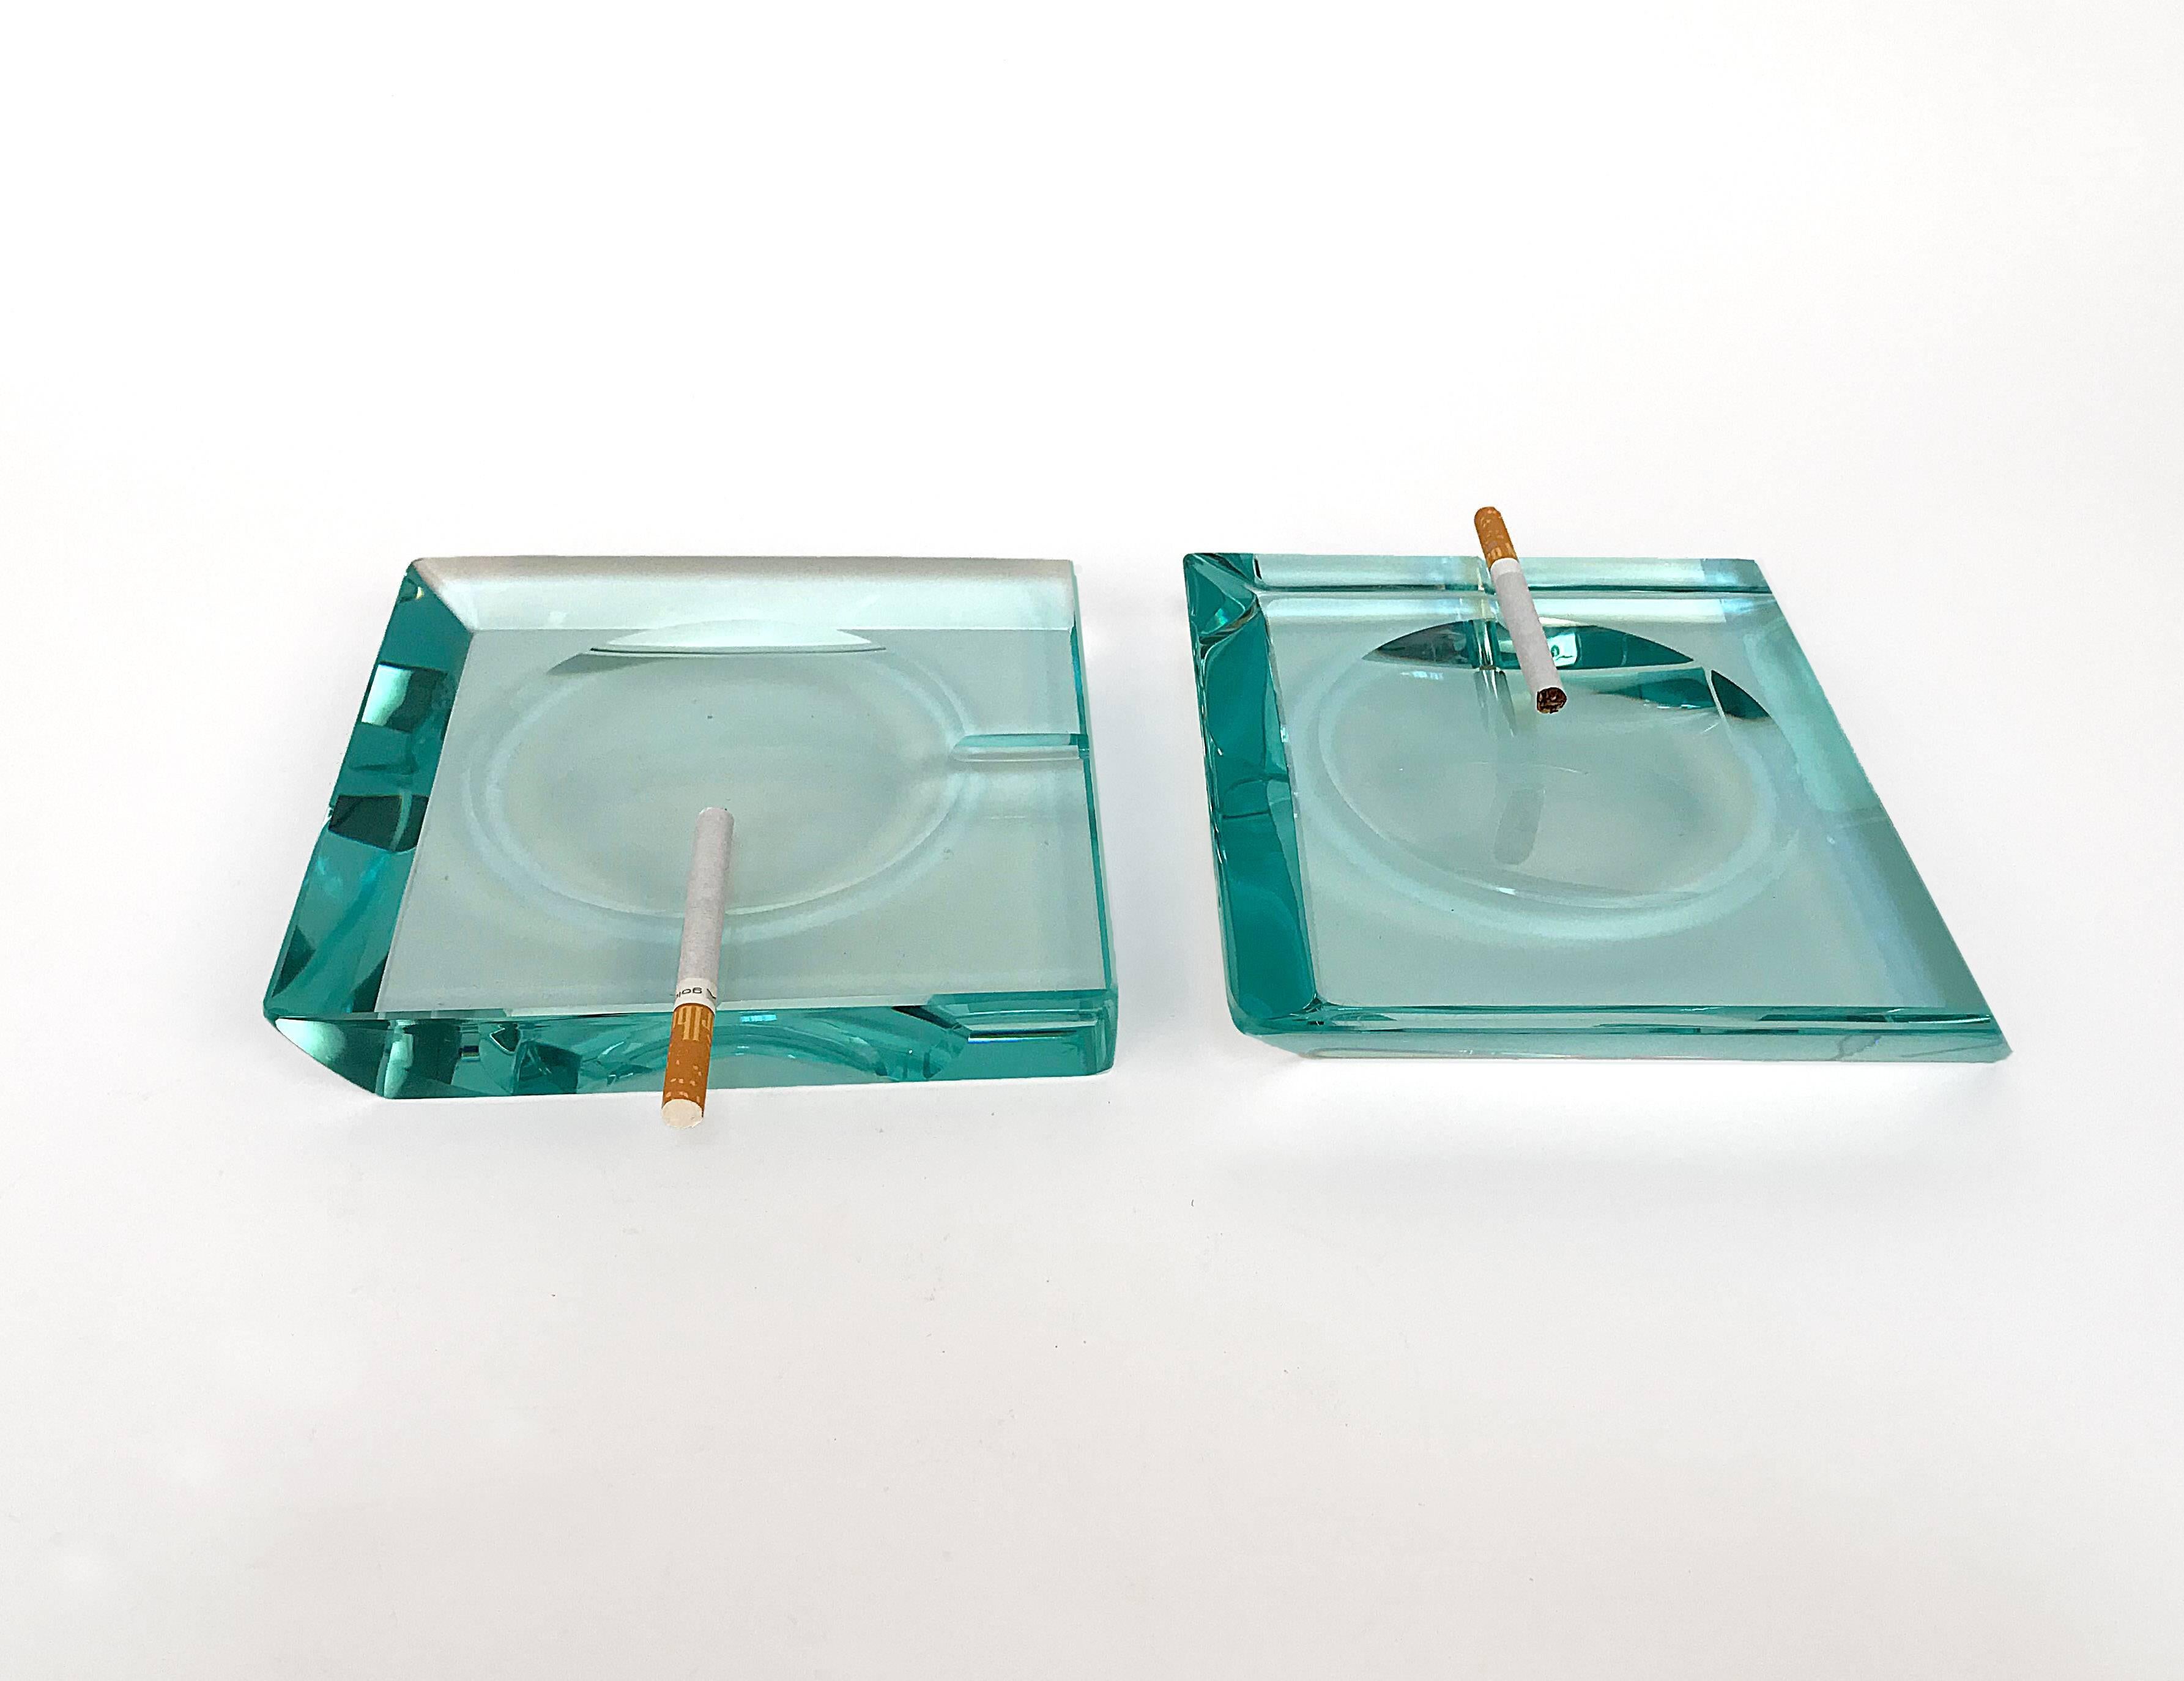 Pair of ashtrays by Fontana Arte.
Green glass, Classic of Fontana Arte, Italy. Two different ashtrays for shape and size.
Measurements: 6.70 x 6.70 - H 0.98
Measurements: 6.90 x 6.90 - H 1.10.